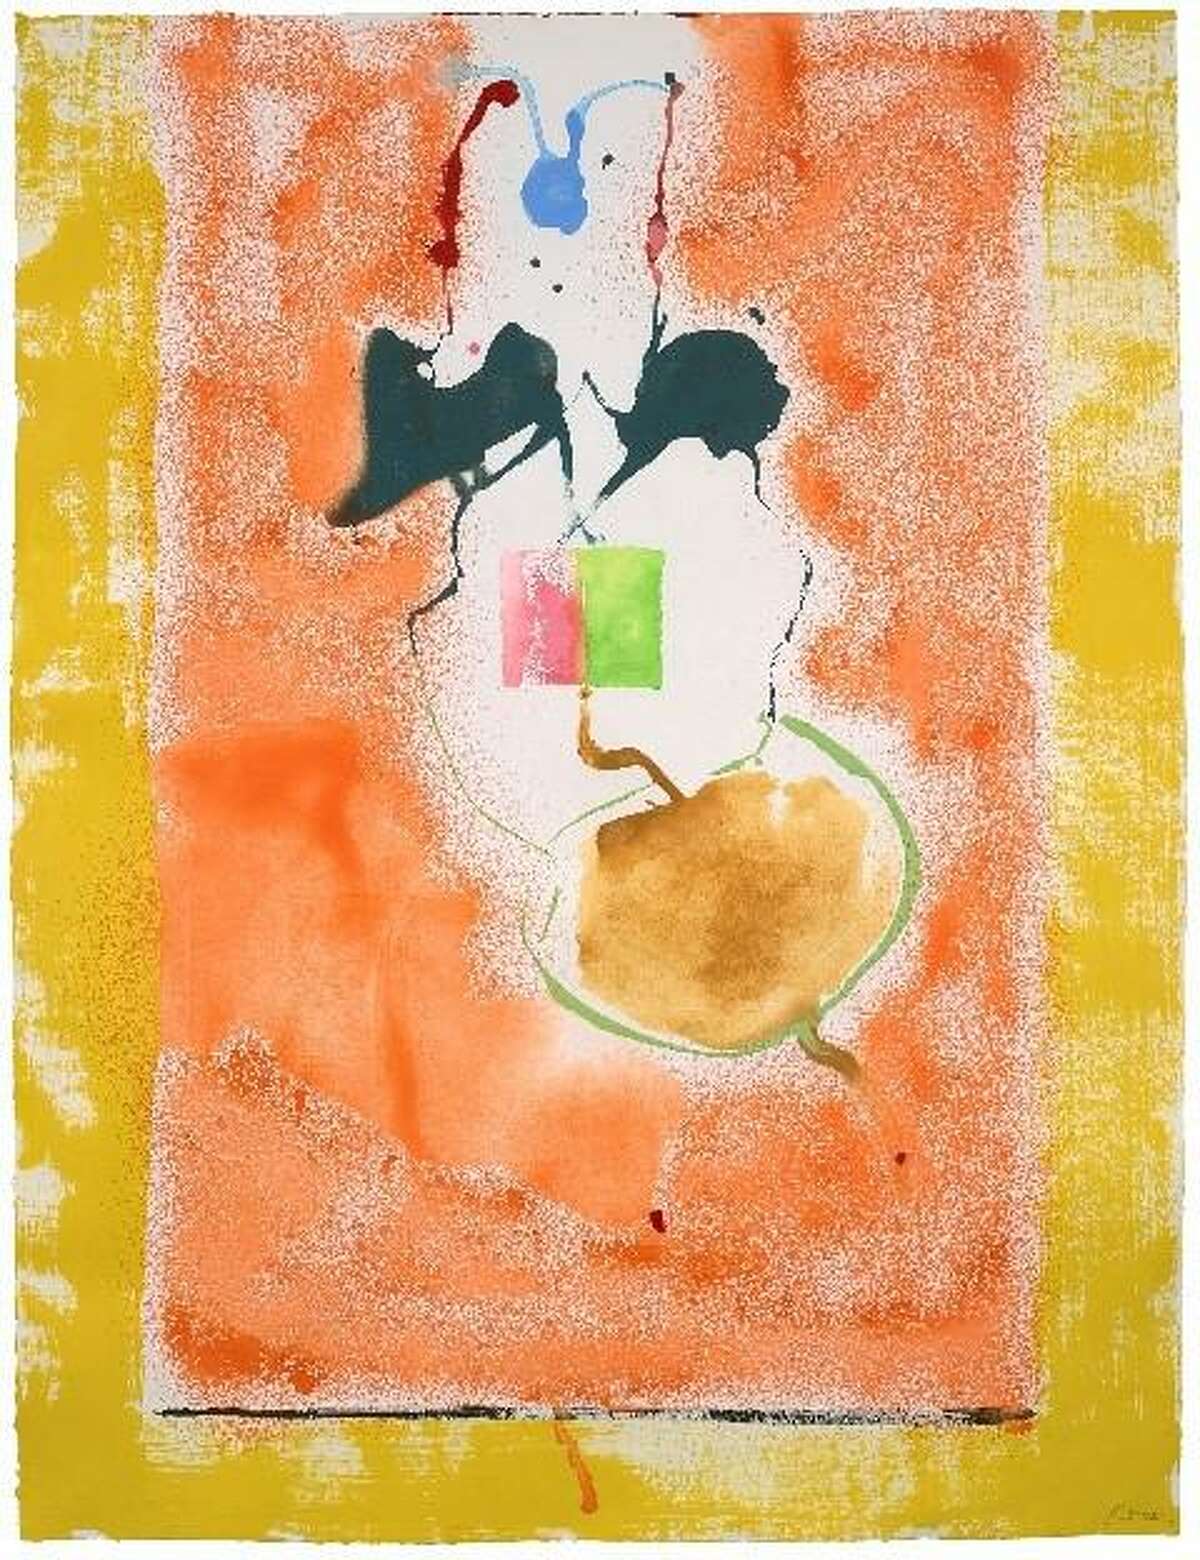 An exhibit of prints by Helen Frankenthaler is now showing at the New Britain Museum of American Art. Above, “Solar Blip.”